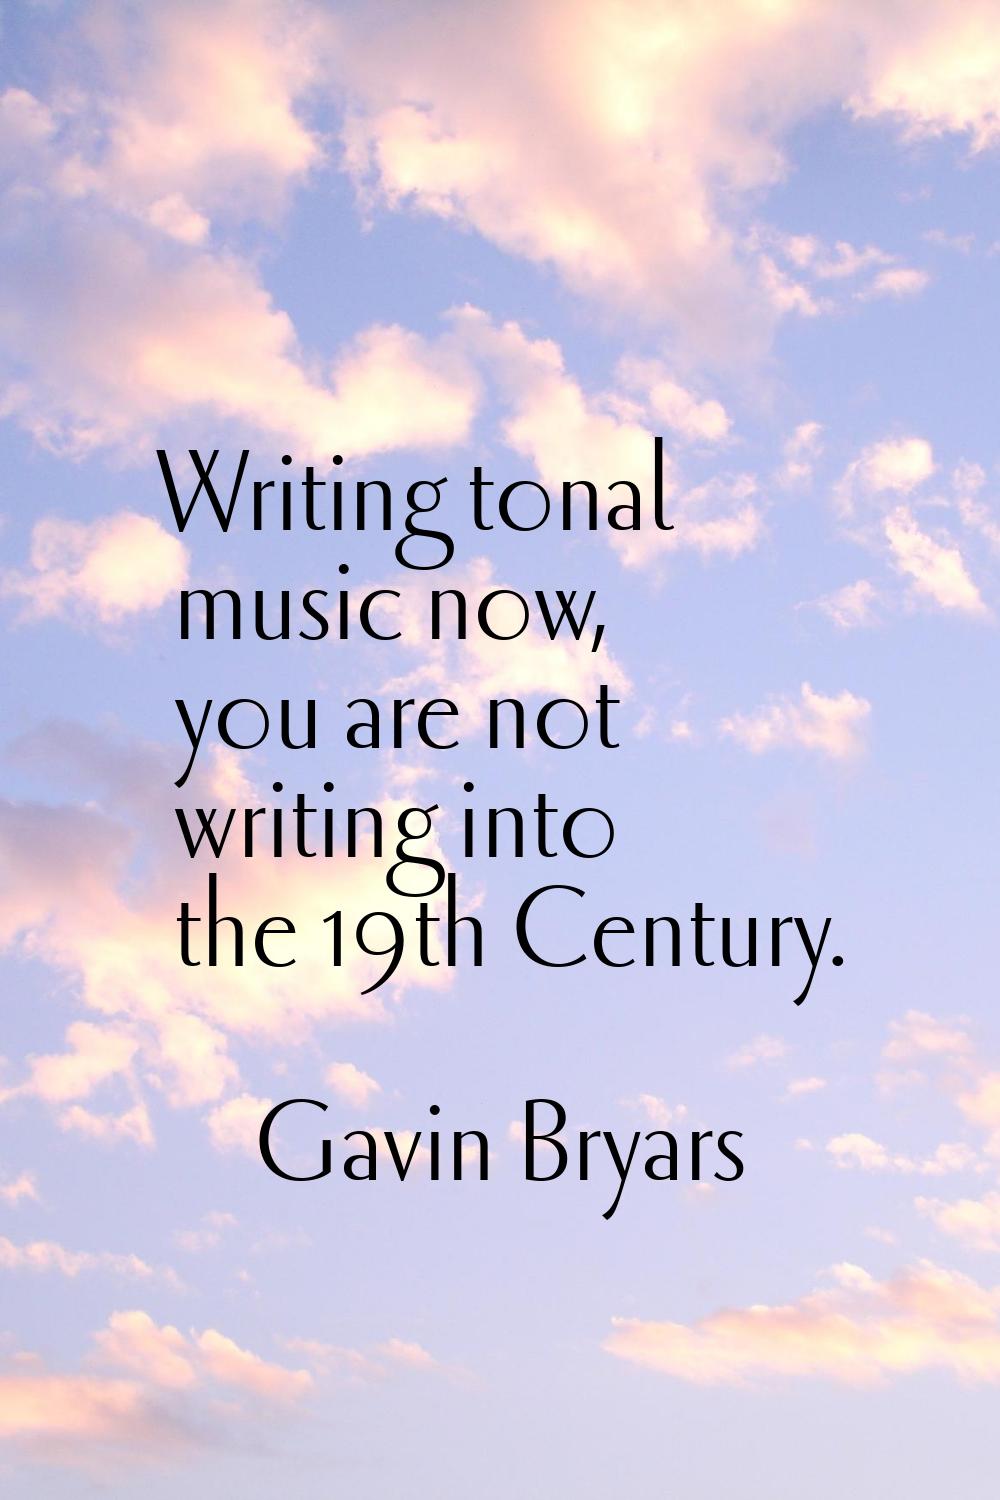 Writing tonal music now, you are not writing into the 19th Century.